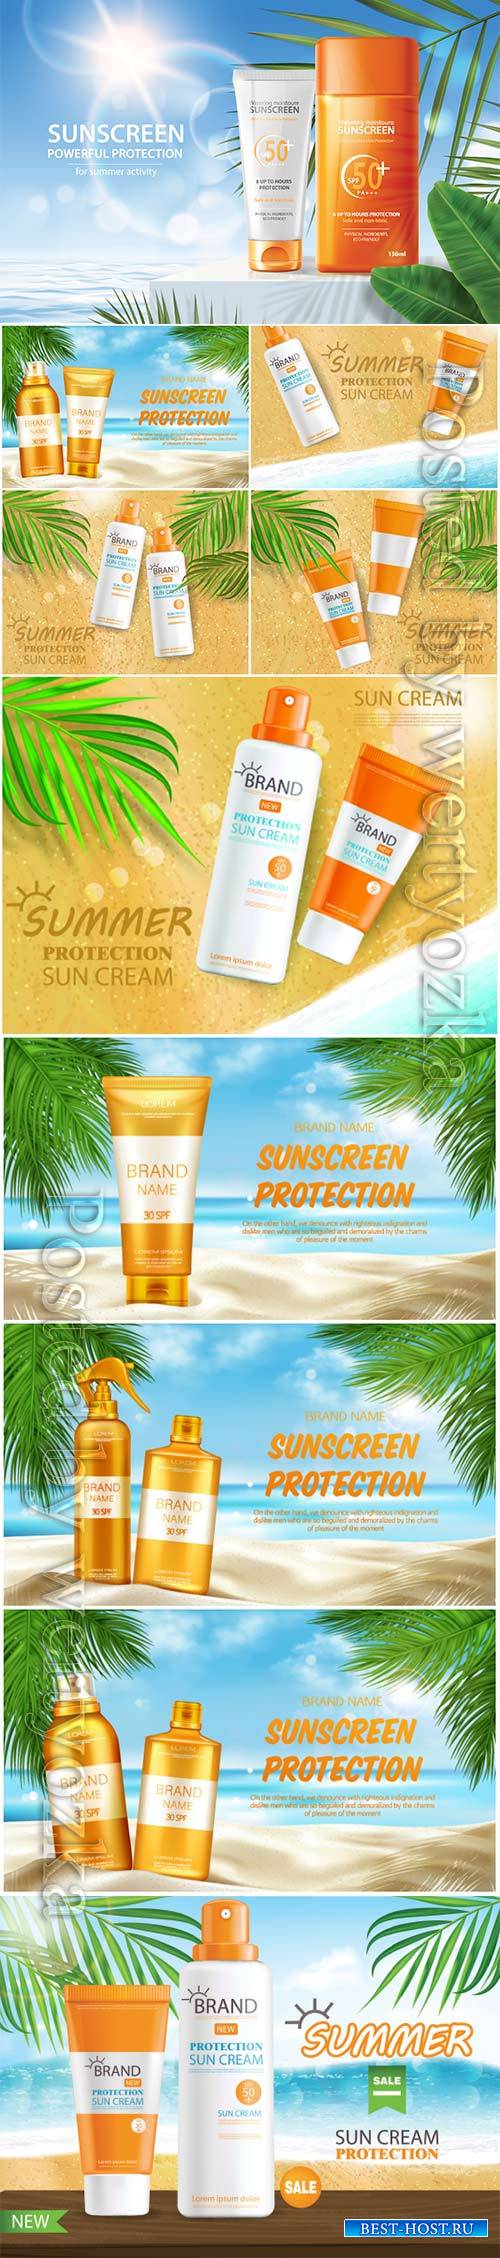 Sunscreen protection cosmetic, mock up banner vector illustration